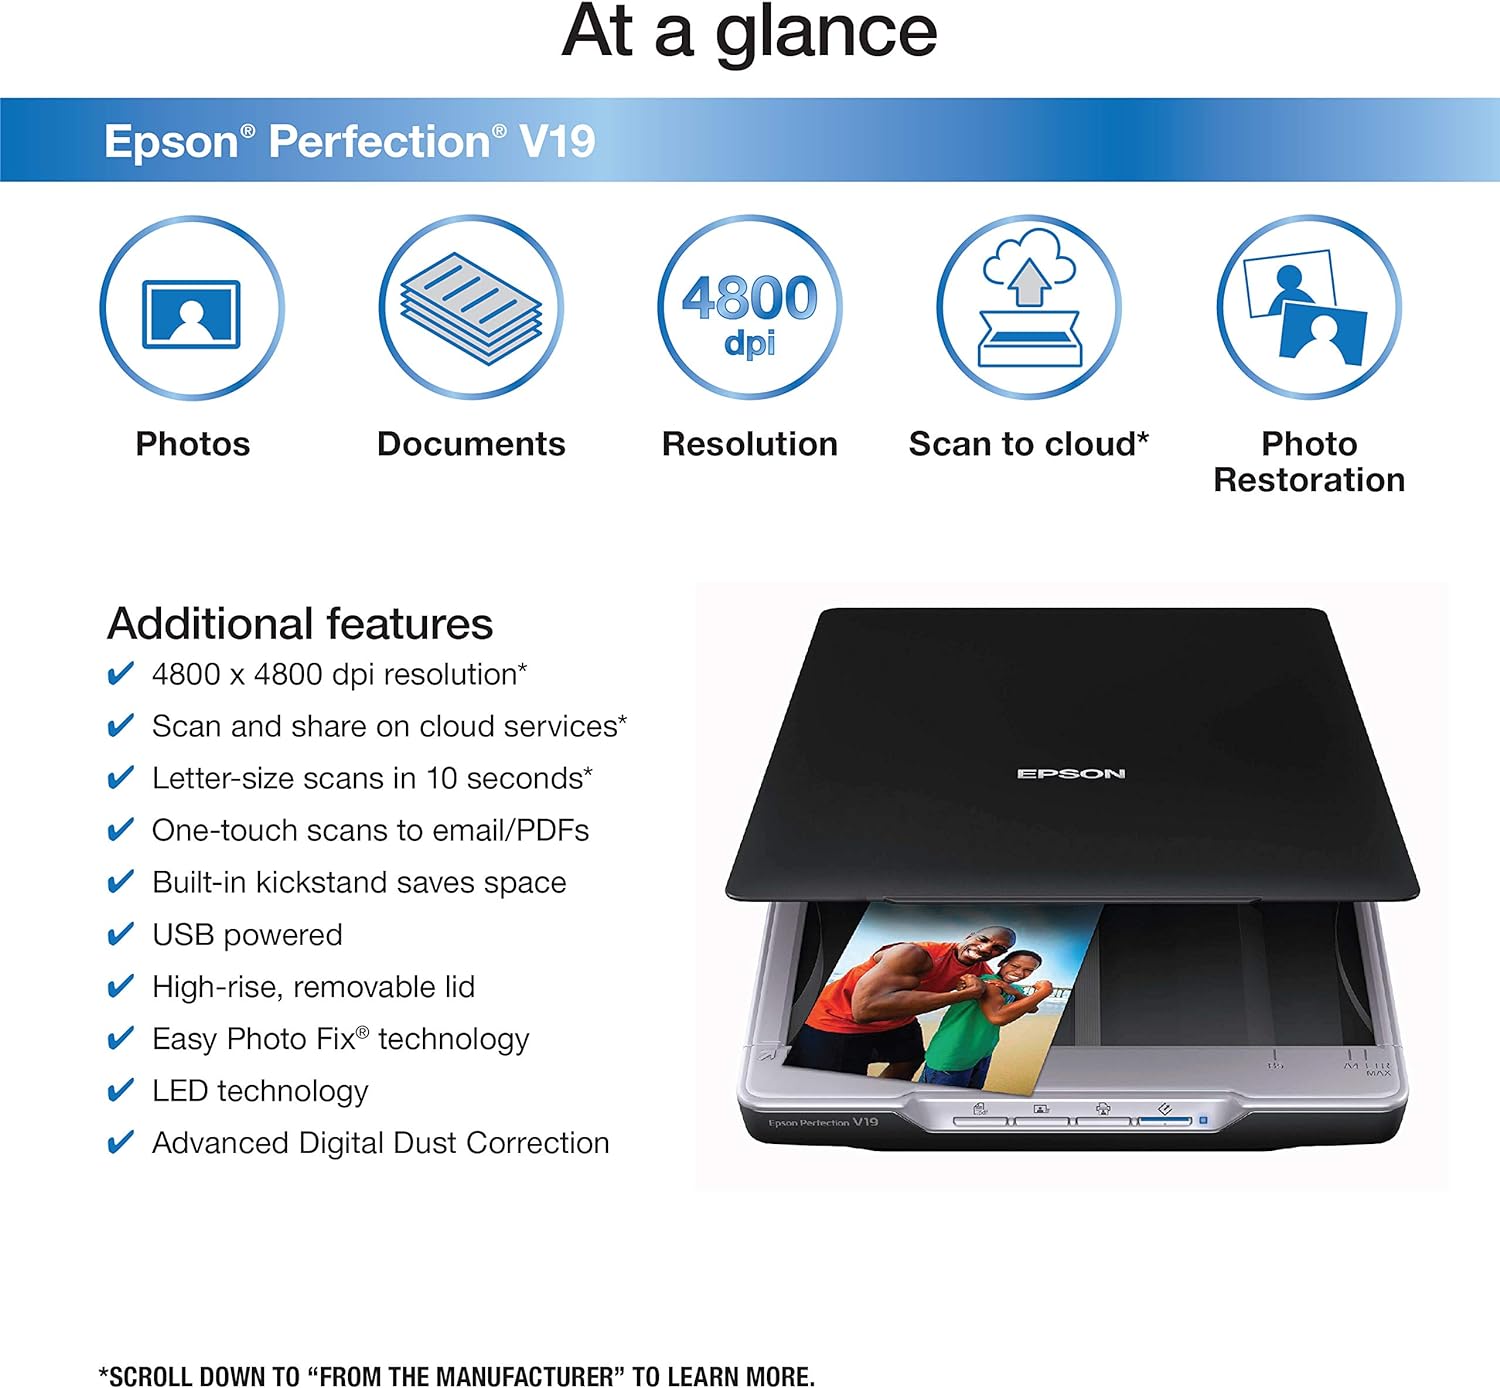 Epson Perfection V19 Color Photo & Document Scanner - $145